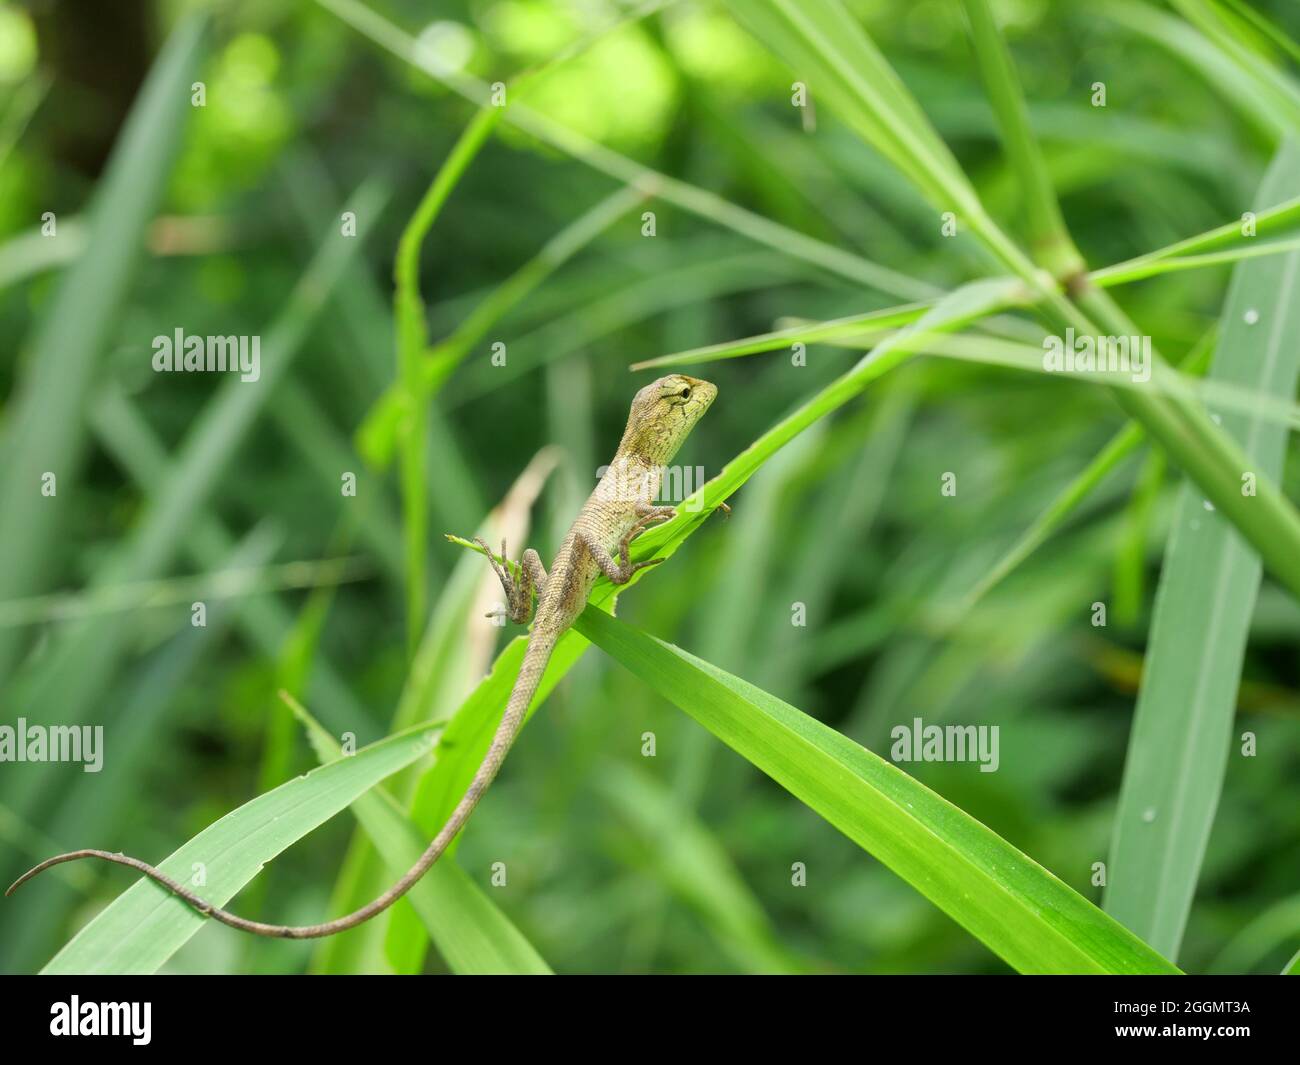 Closeup young Oriental garden or Eastern garden or Changeable lizard, Chameleon with natural green leaves in the background, Thailand Stock Photo